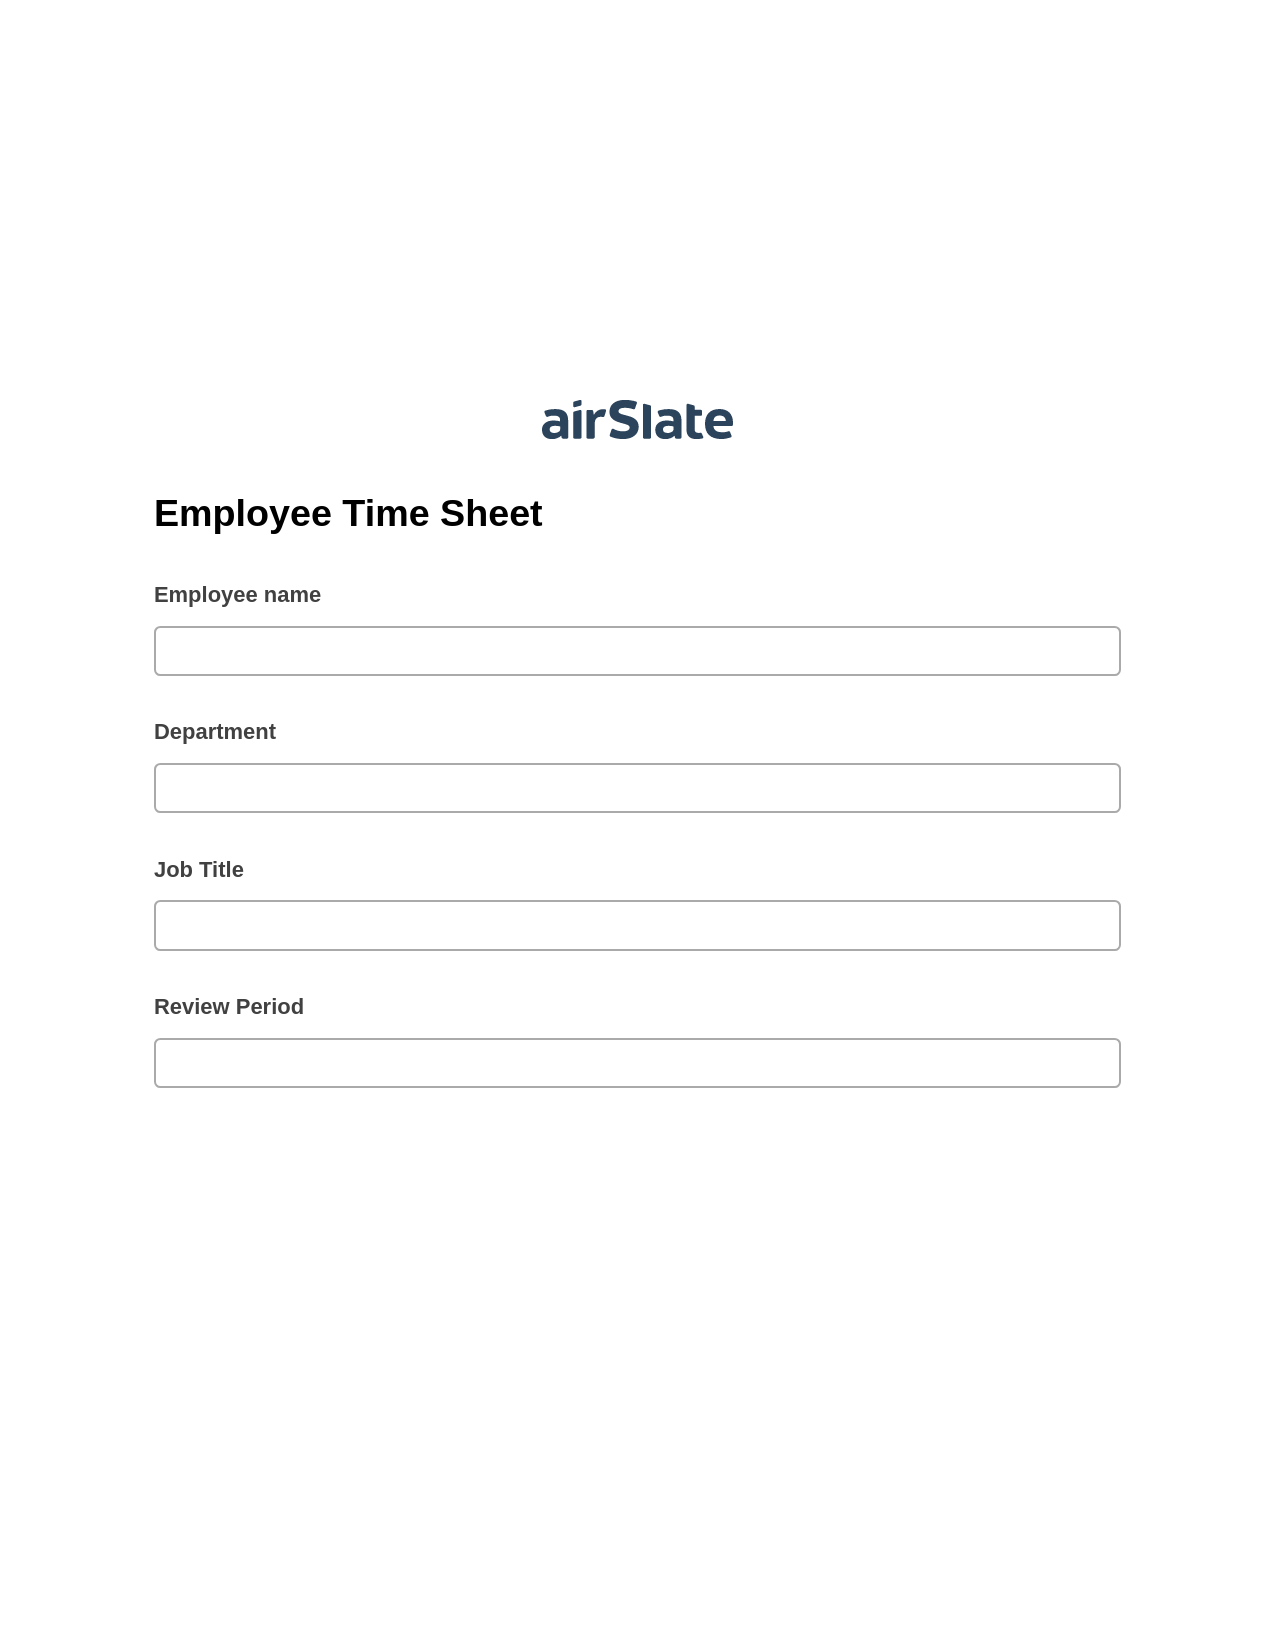 Multirole Employee Time Sheet Pre-fill Dropdowns from Airtable, Jira Bot, Post-finish Document Bot